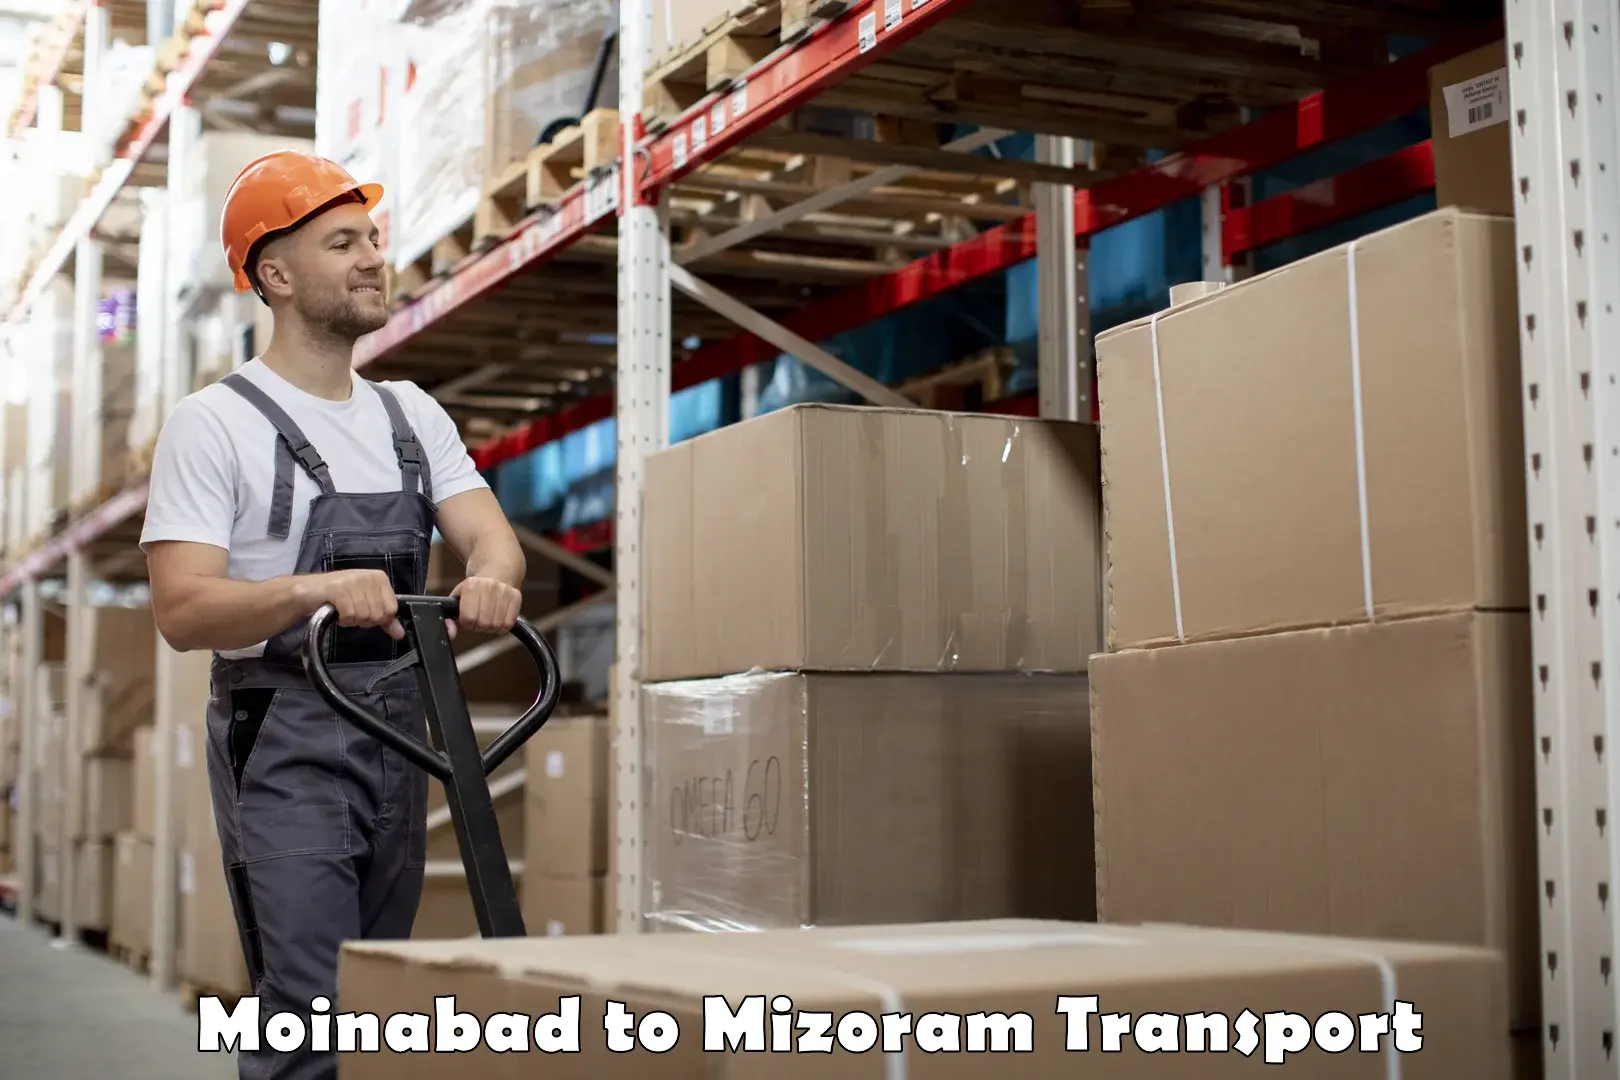 Commercial transport service Moinabad to Mizoram